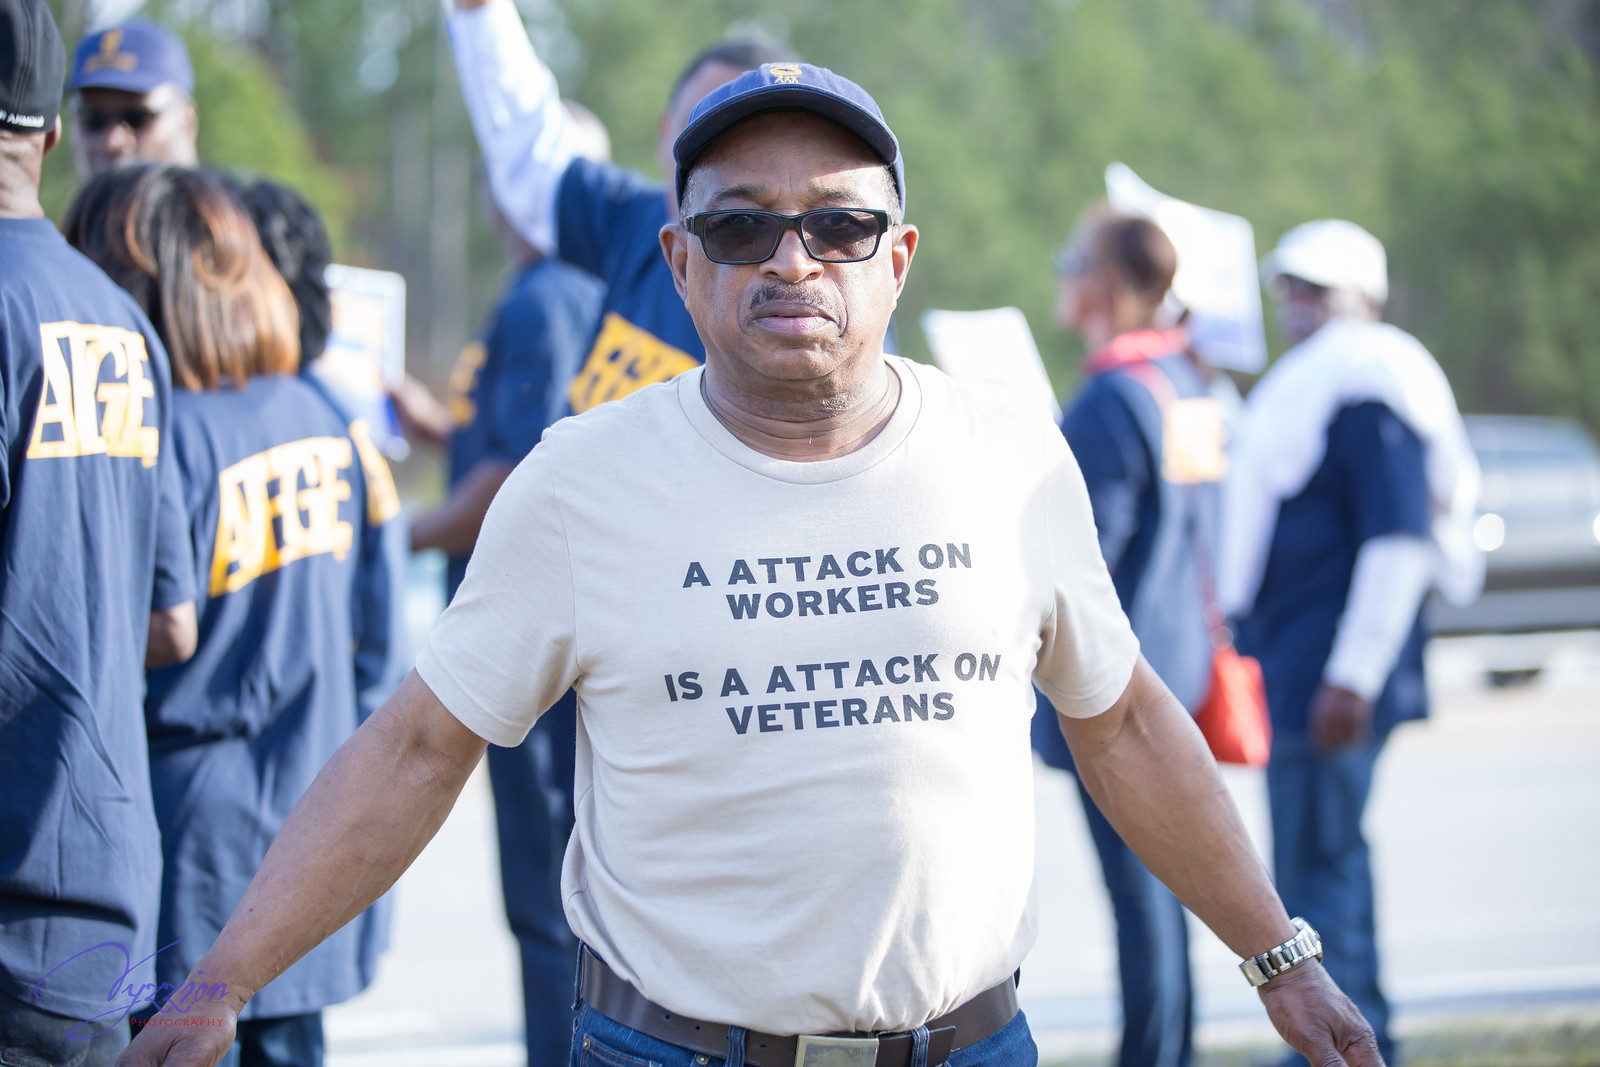 An attack on workers is an attack on veterans